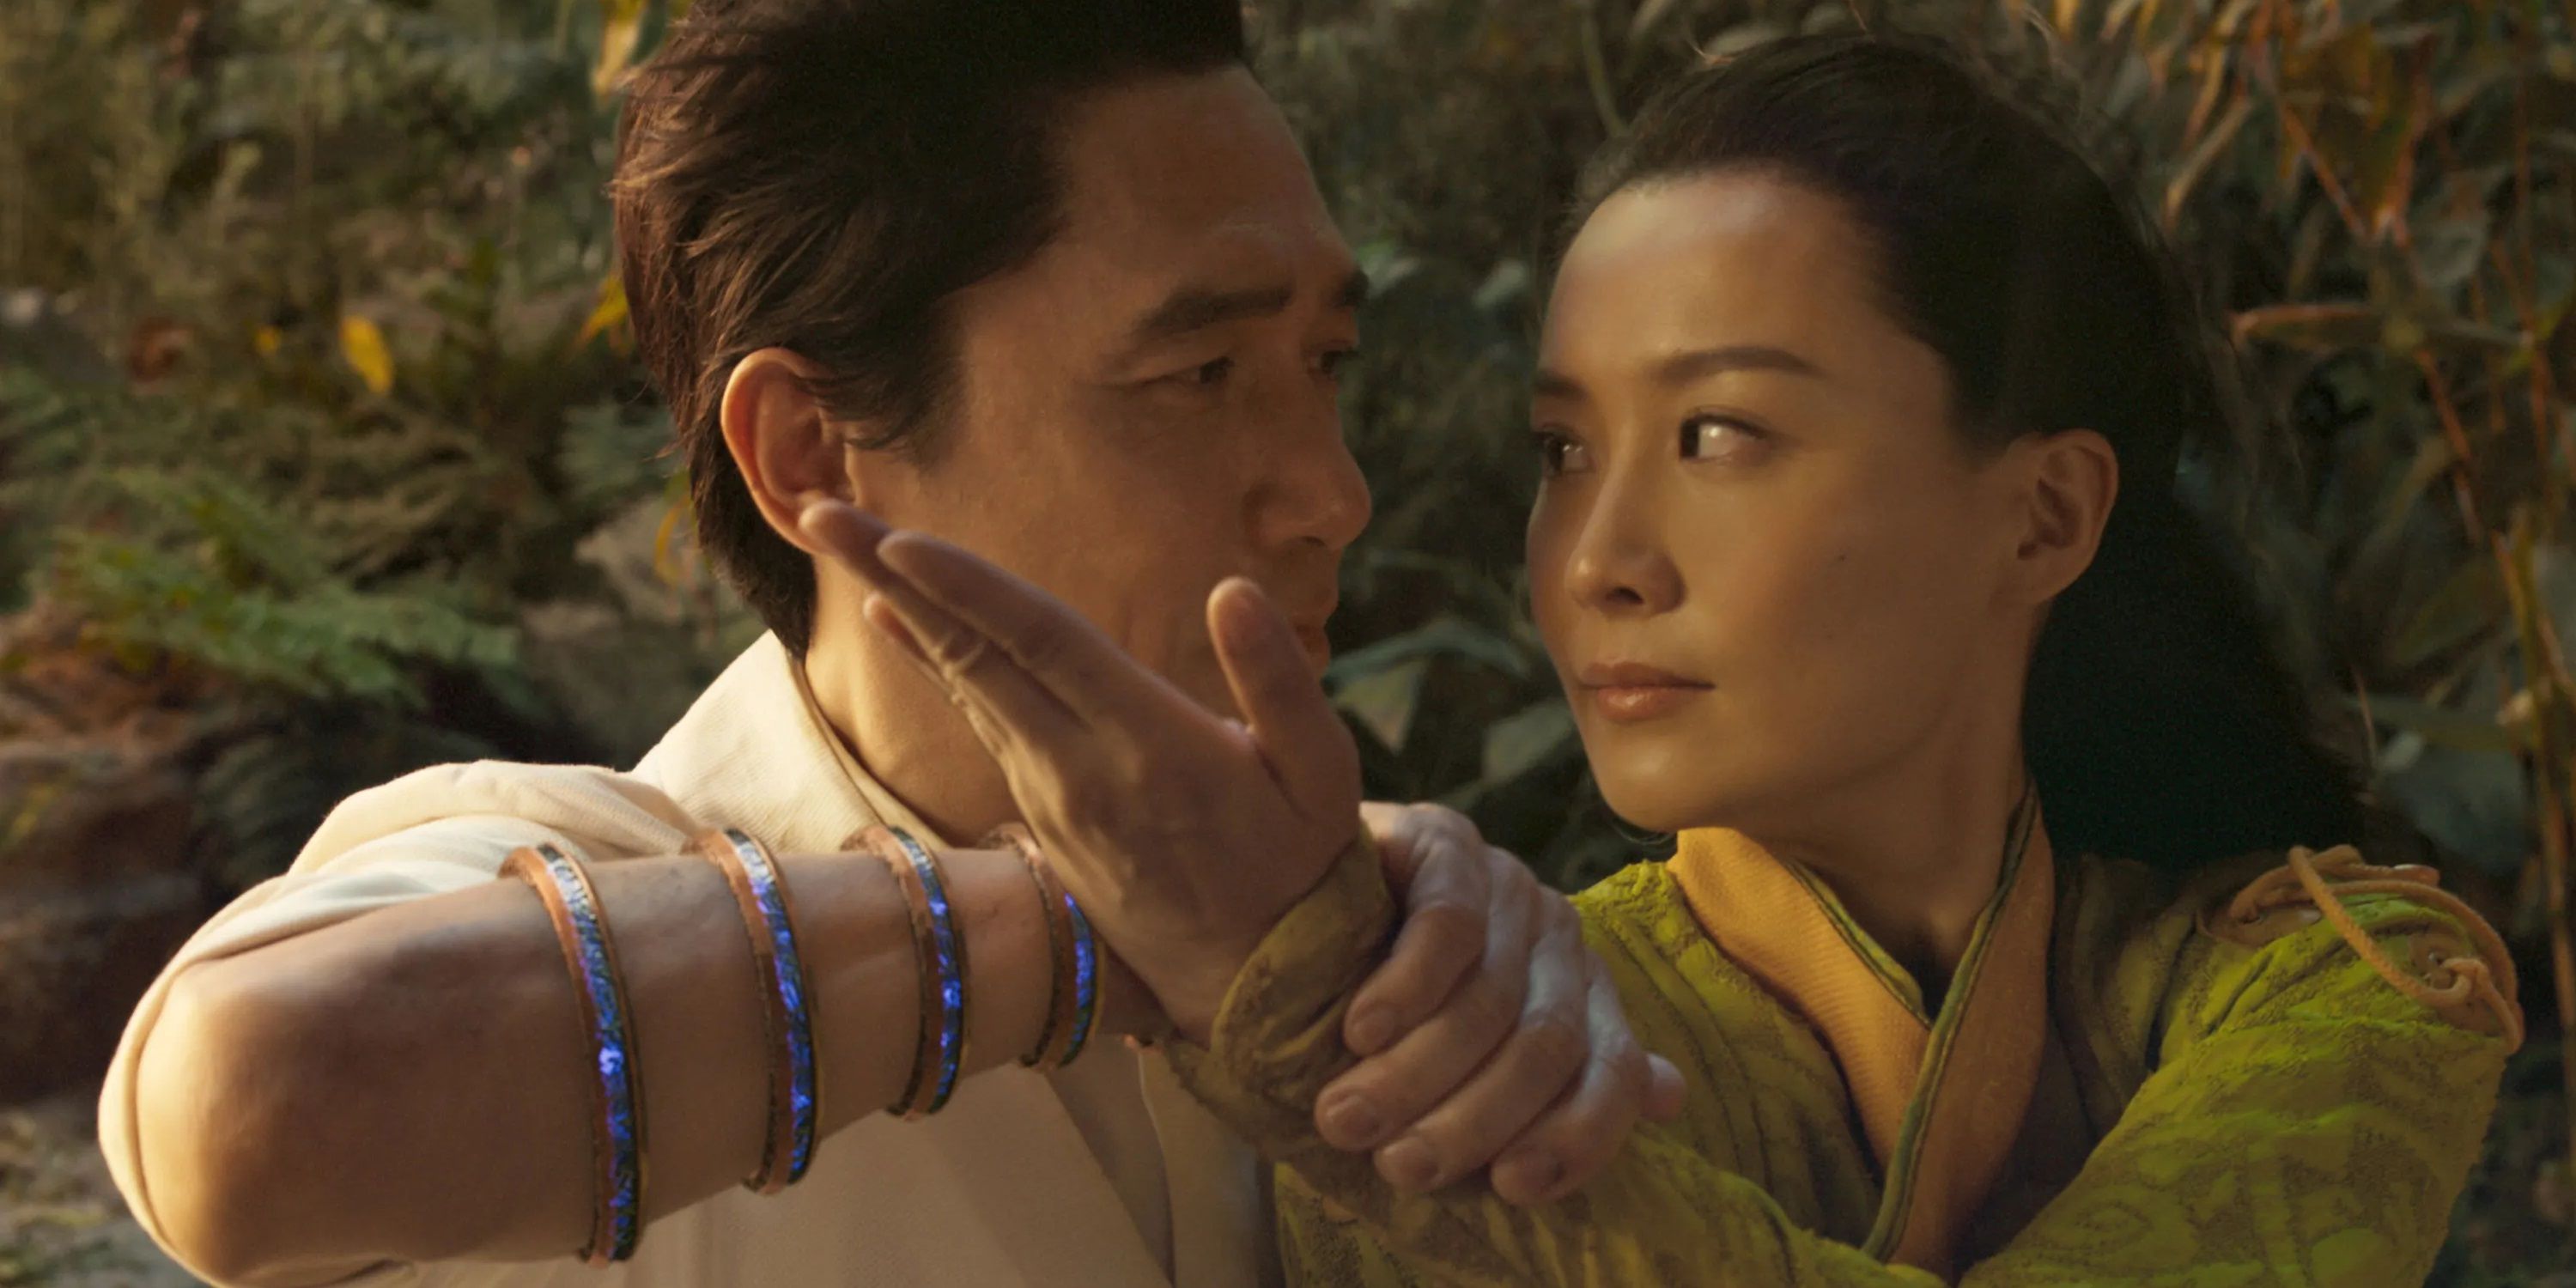 Wenwu fighting Li in the prologue of Shang-Chi and the Legend of the Ten Rings